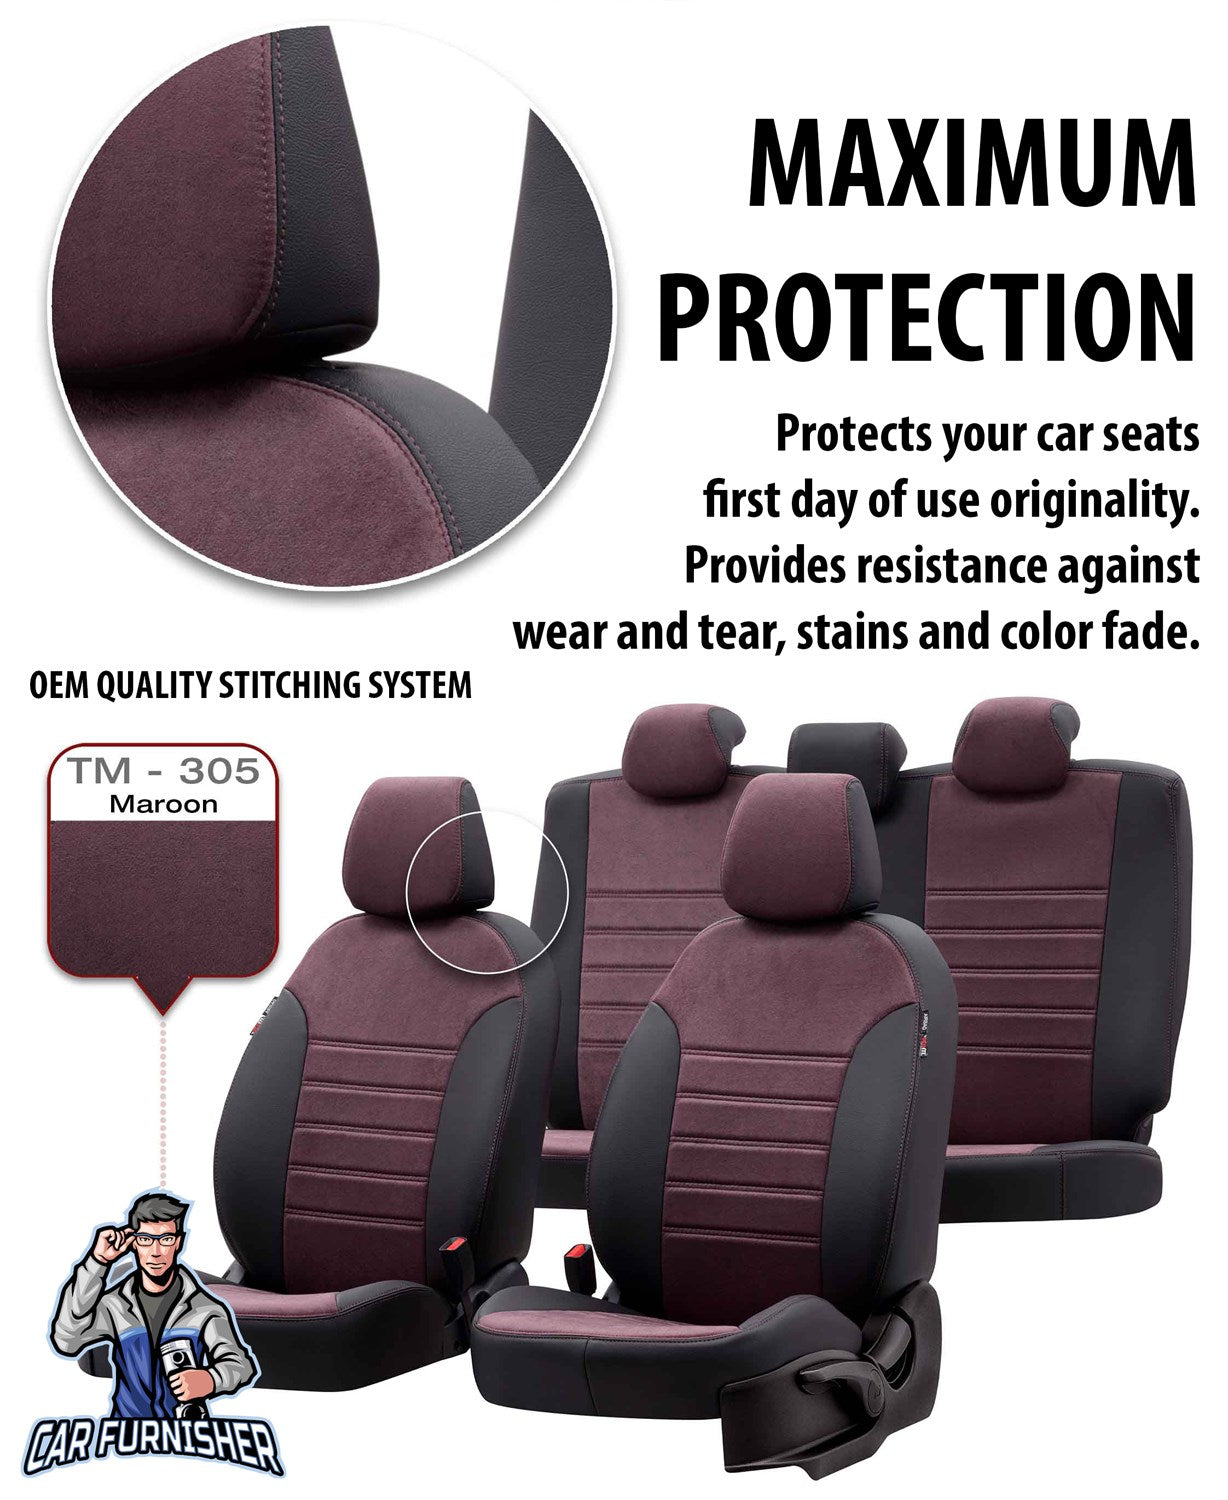 Peugeot 508 Seat Covers Milano Suede Design Burgundy Leather & Suede Fabric